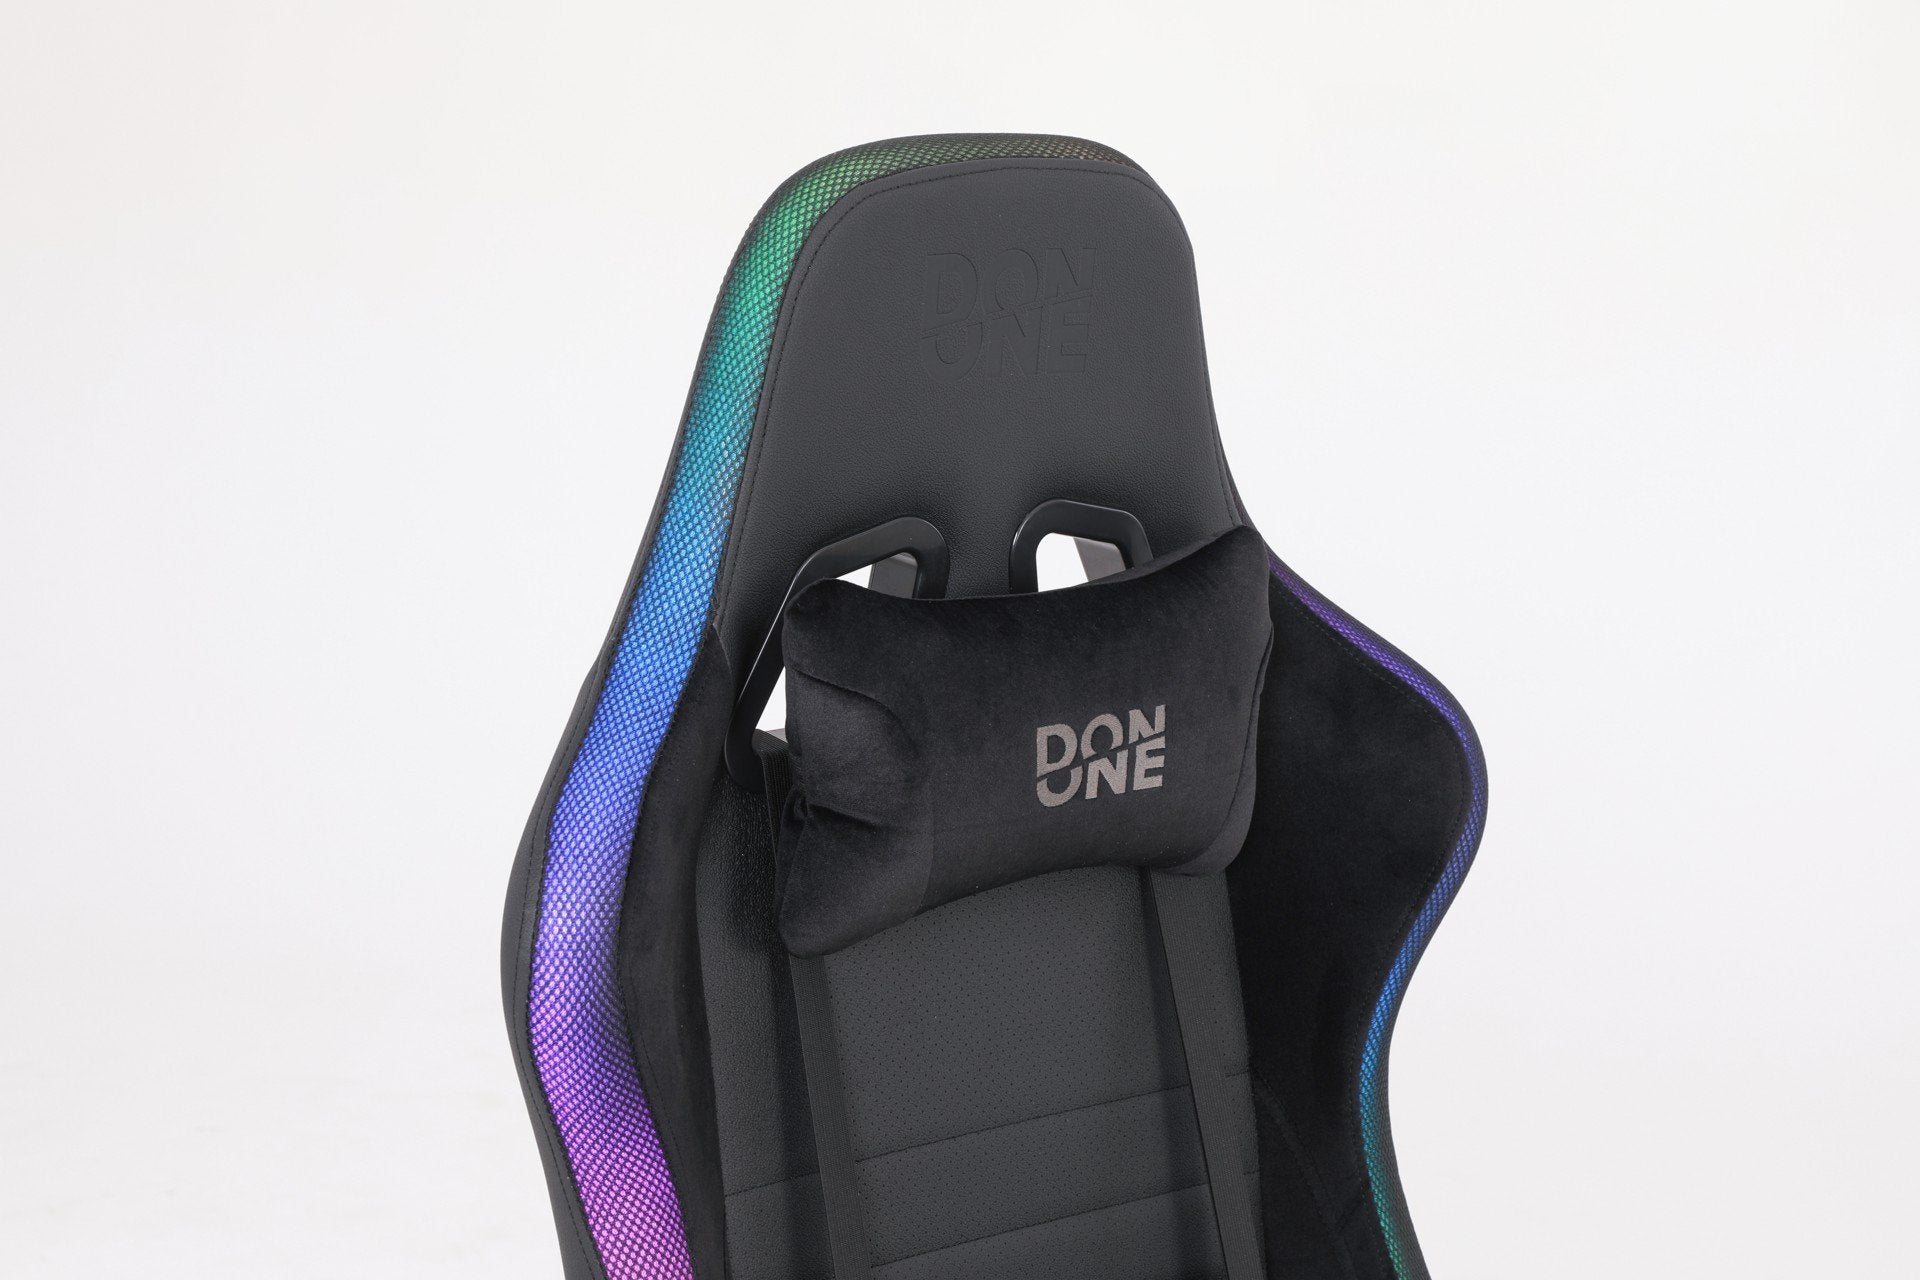 DON ONE - Valentino SUPER - RGB Gamerstol Med Lys DON ONE